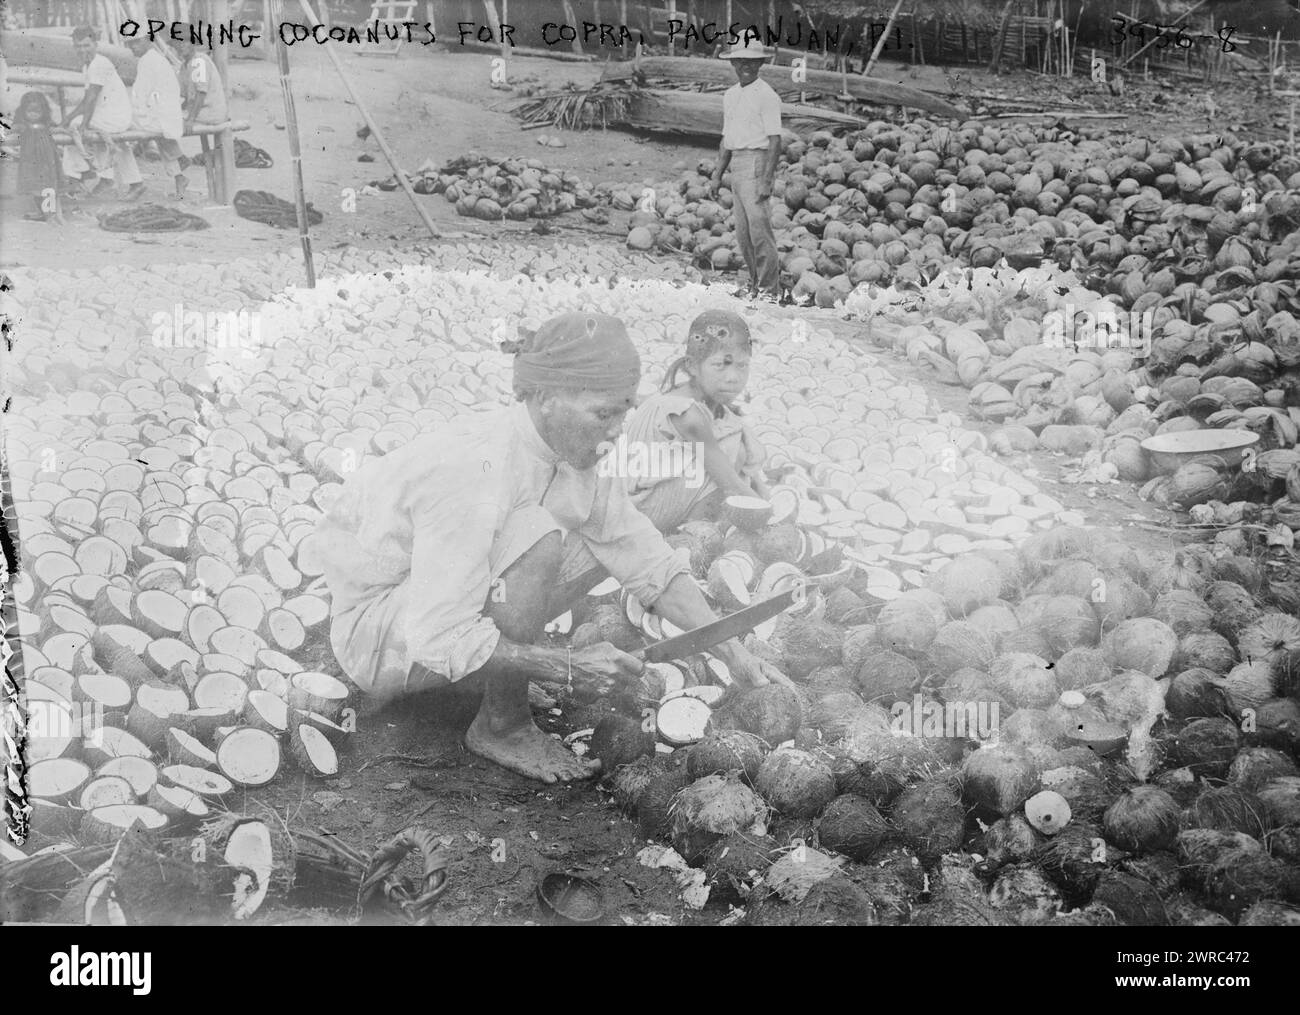 Opening Coconuts for Copra, Pagsanjan, P.I., Photograph shows man opening coconuts with a knife, Pagsanjan, Philippines., between ca. 1915 and ca. 1920, Glass negatives, 1 negative: glass Stock Photo